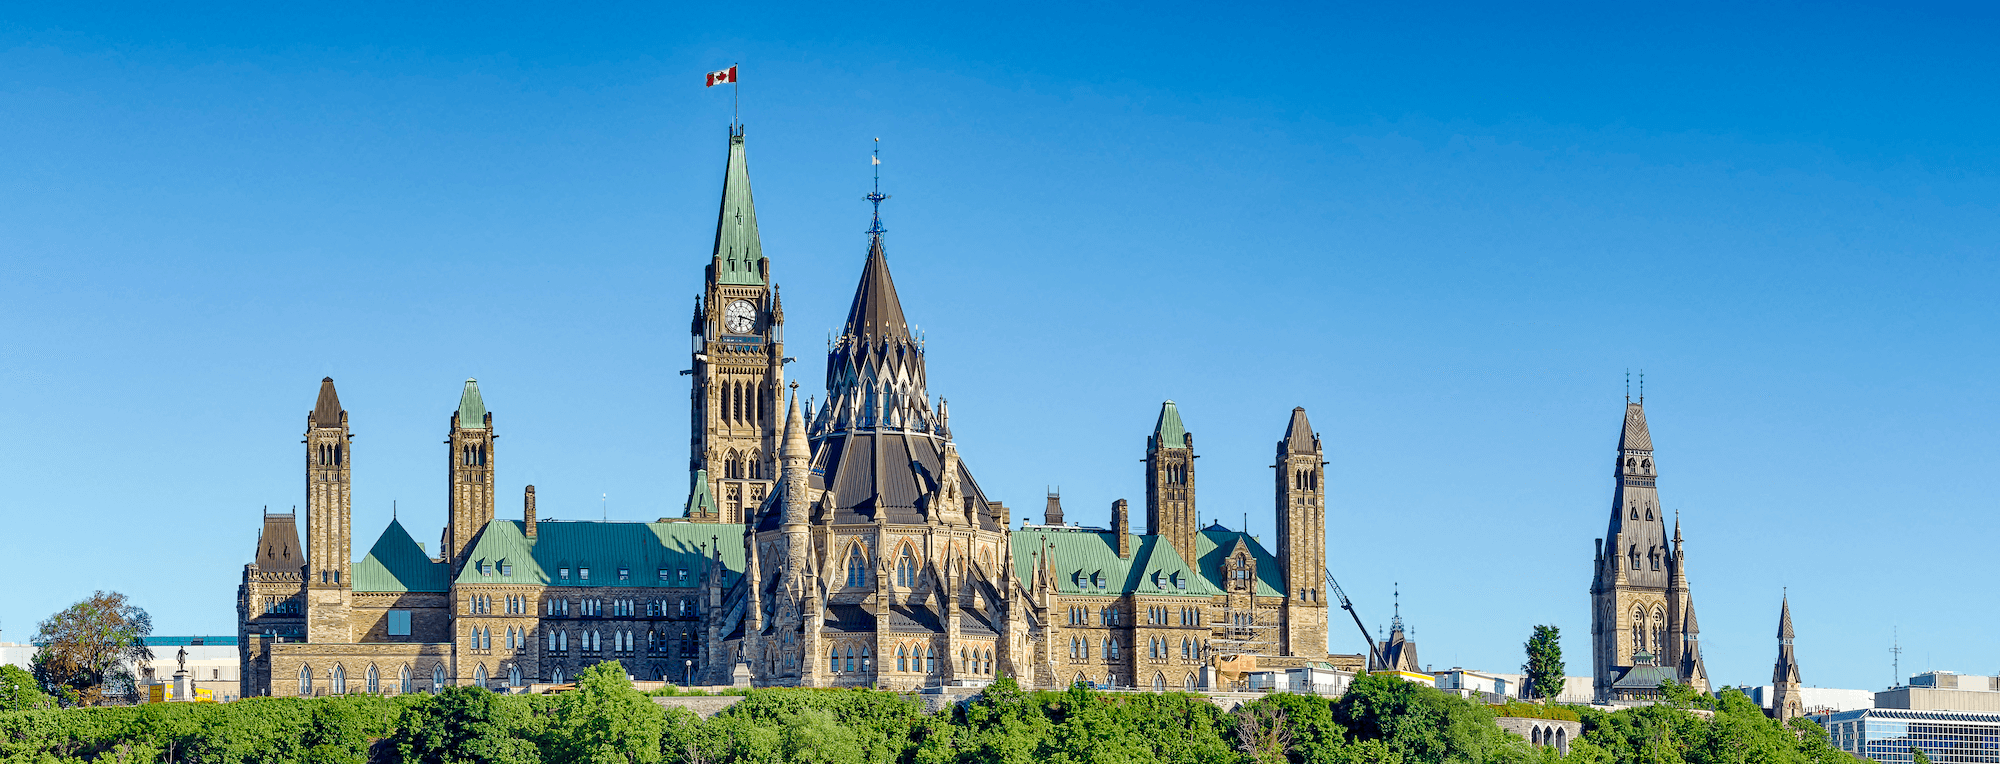 the Canadian Parliament buildings in Ottawa